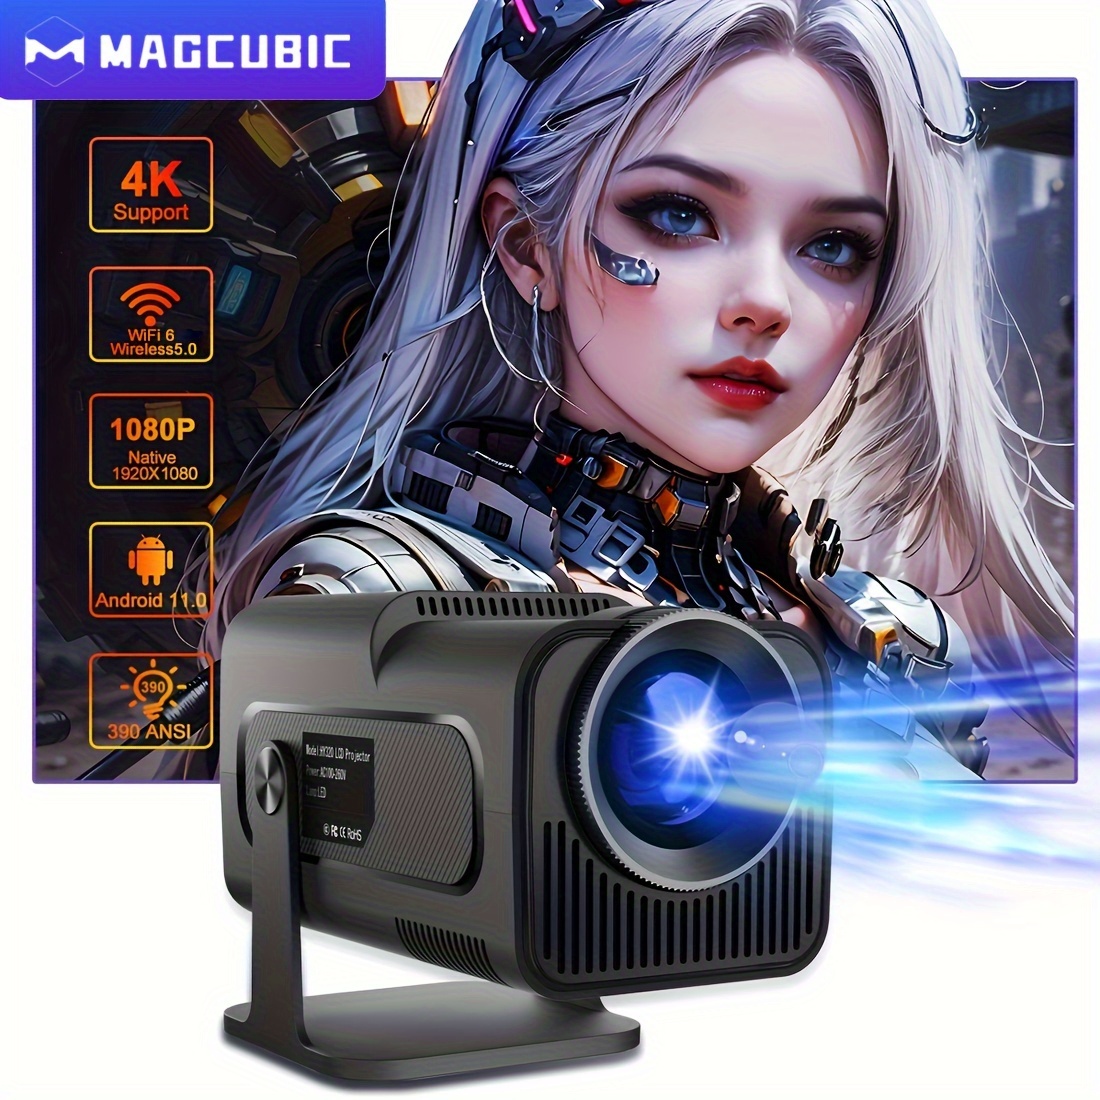 

Magcubic 4k Android 11 Projector Us Plug Native 1080p 390ansi Hy320 Dual Wifi 6 Bt5.0 1920*1080p Cinema Portable Projetor Upgrated